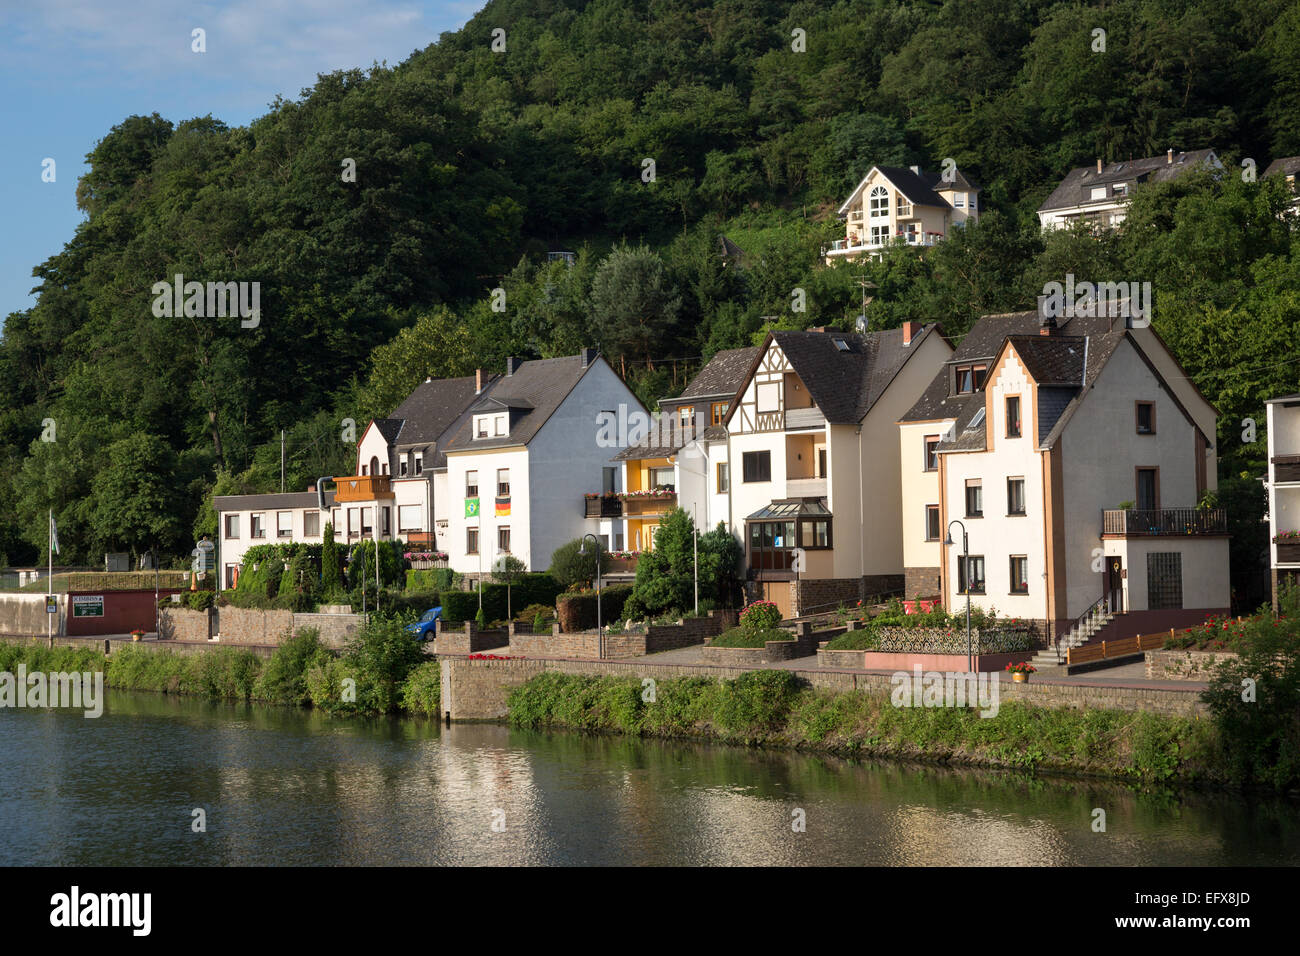 Homes in Kattenes, Germany along the banks of the Moselle river Stock Photo  - Alamy